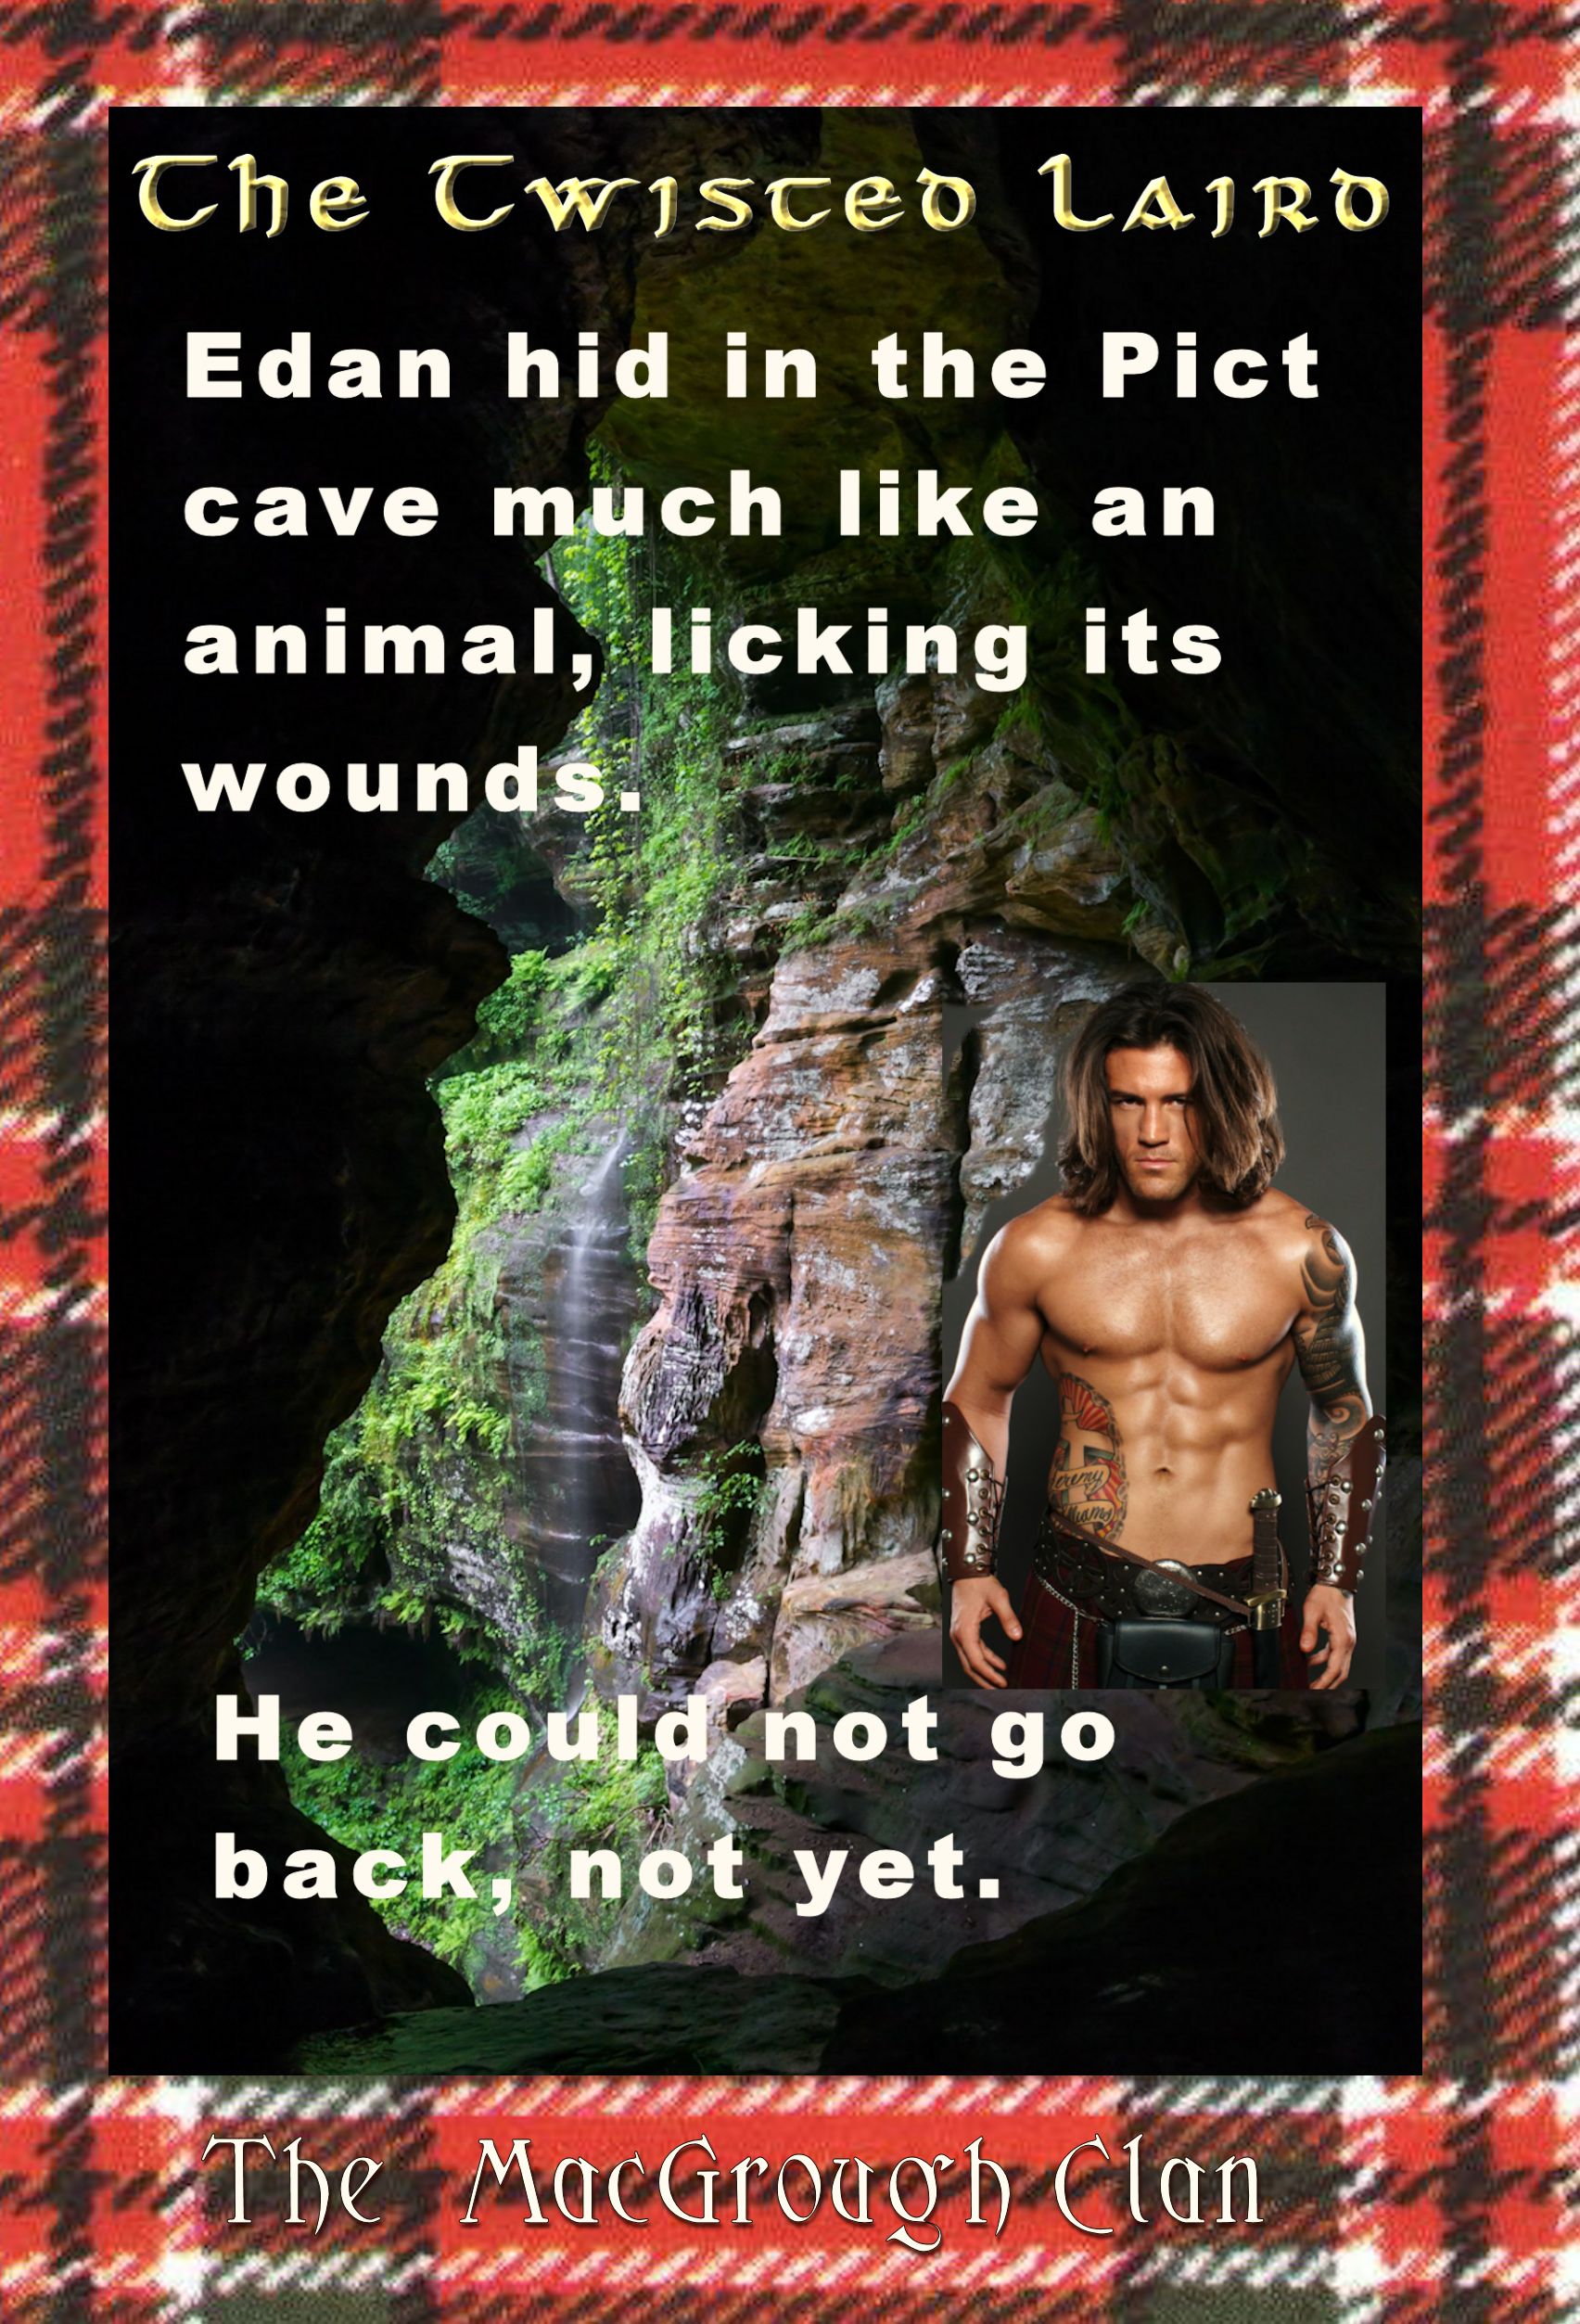 The Twisted Laird. Pict Cave.jpg